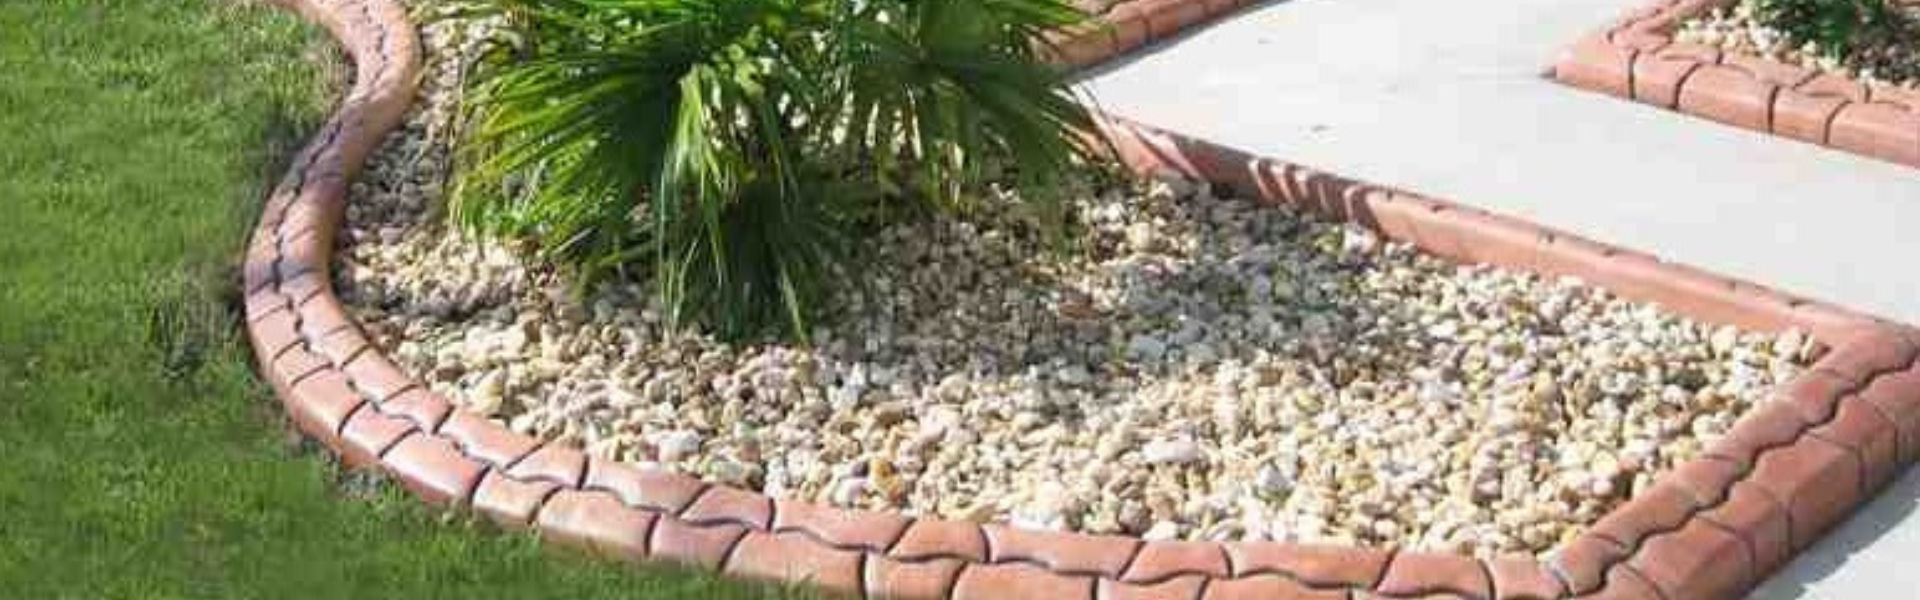 brown custom concrete curbing around landscape whit rocks and a palm tree in the center